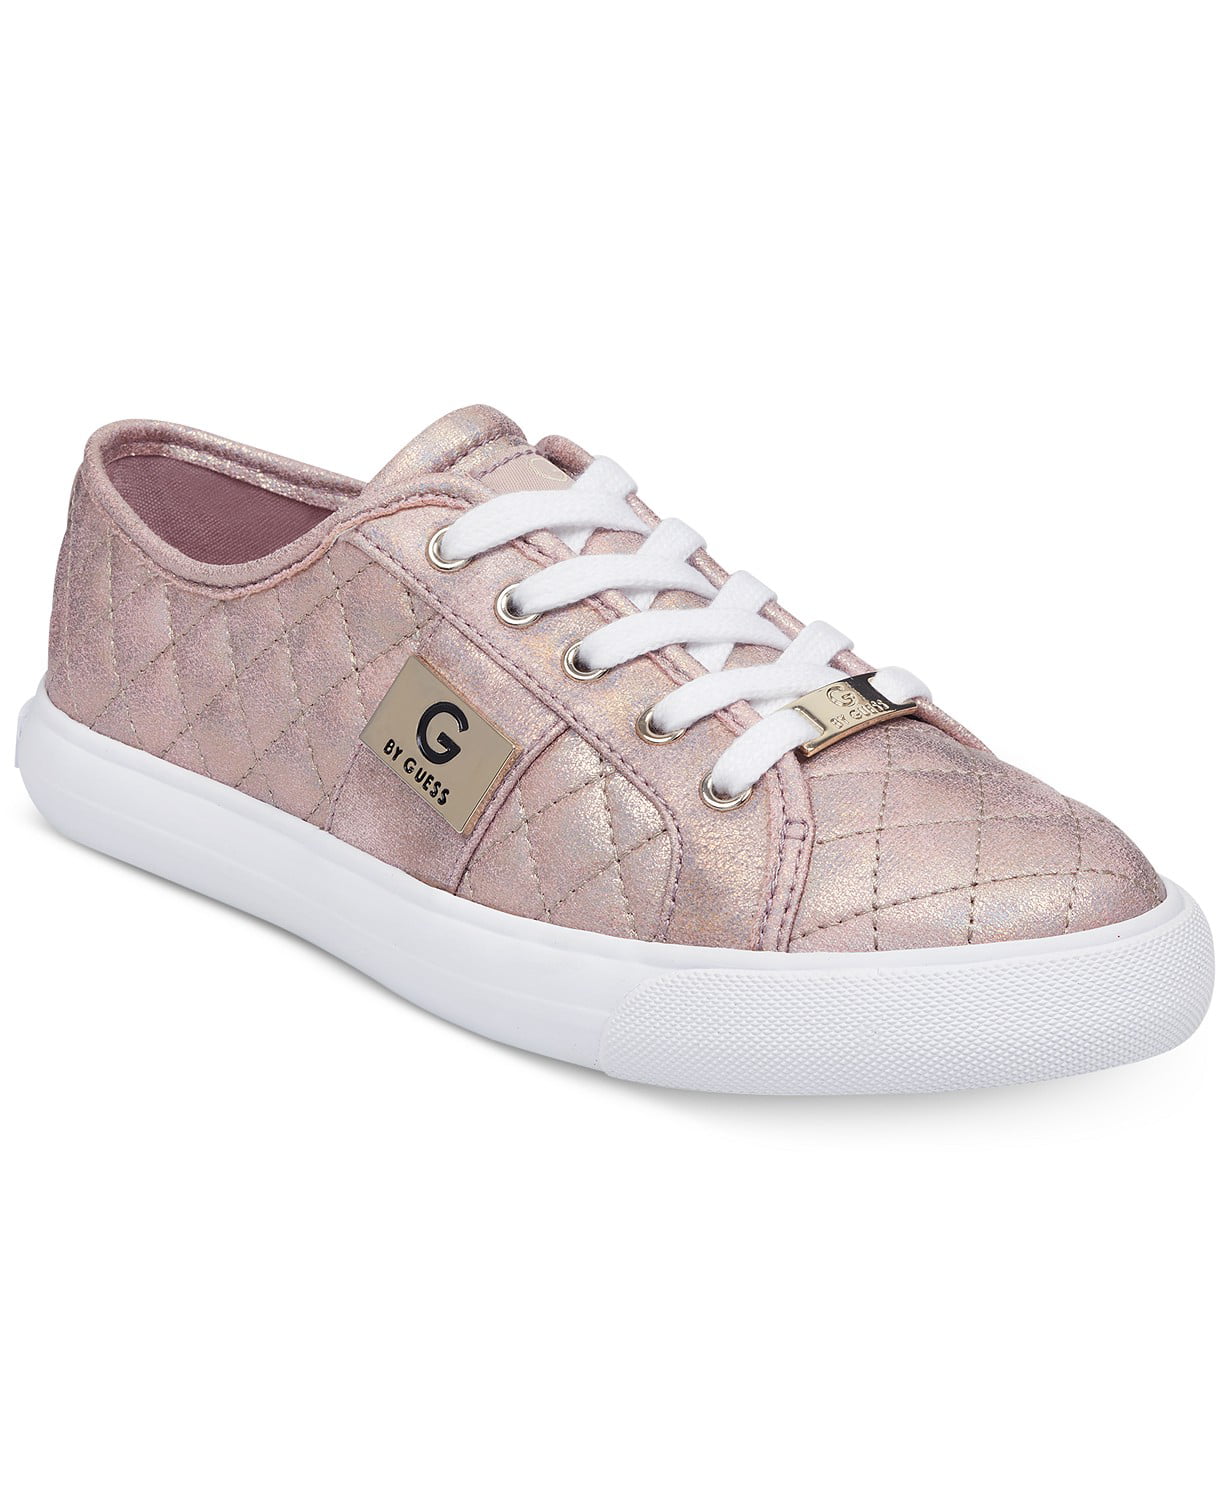 g by guess pink shoes